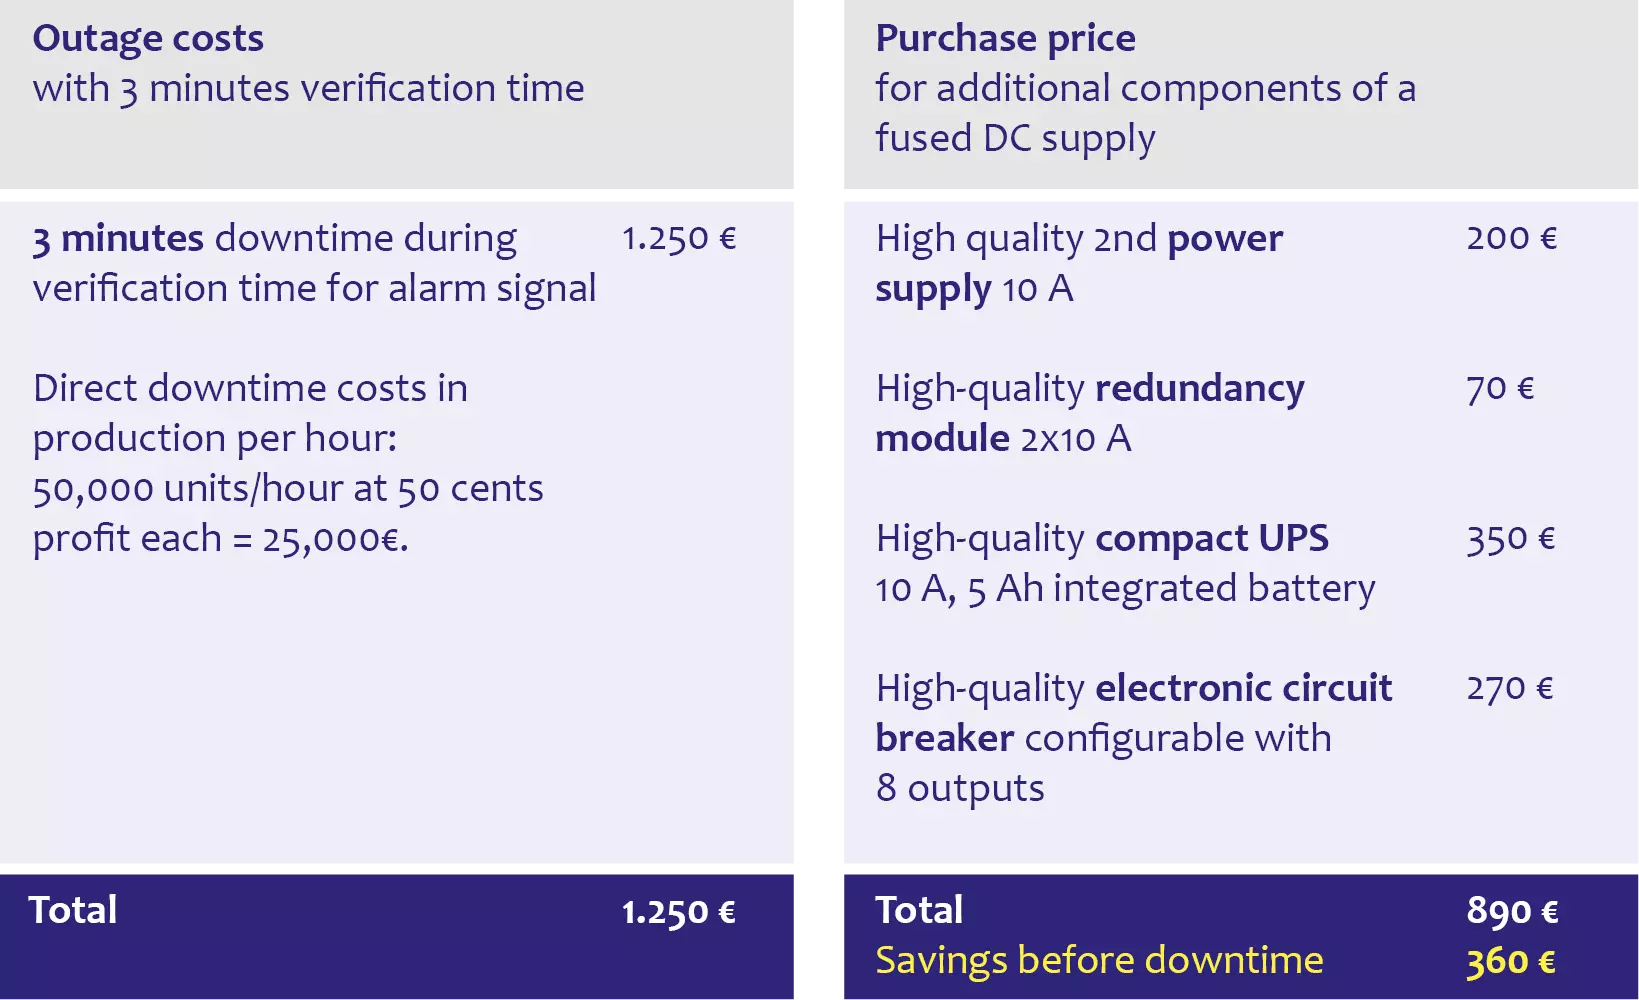 The additional costs for a constantly reliable DC power supply are lower than the direct failure costs.